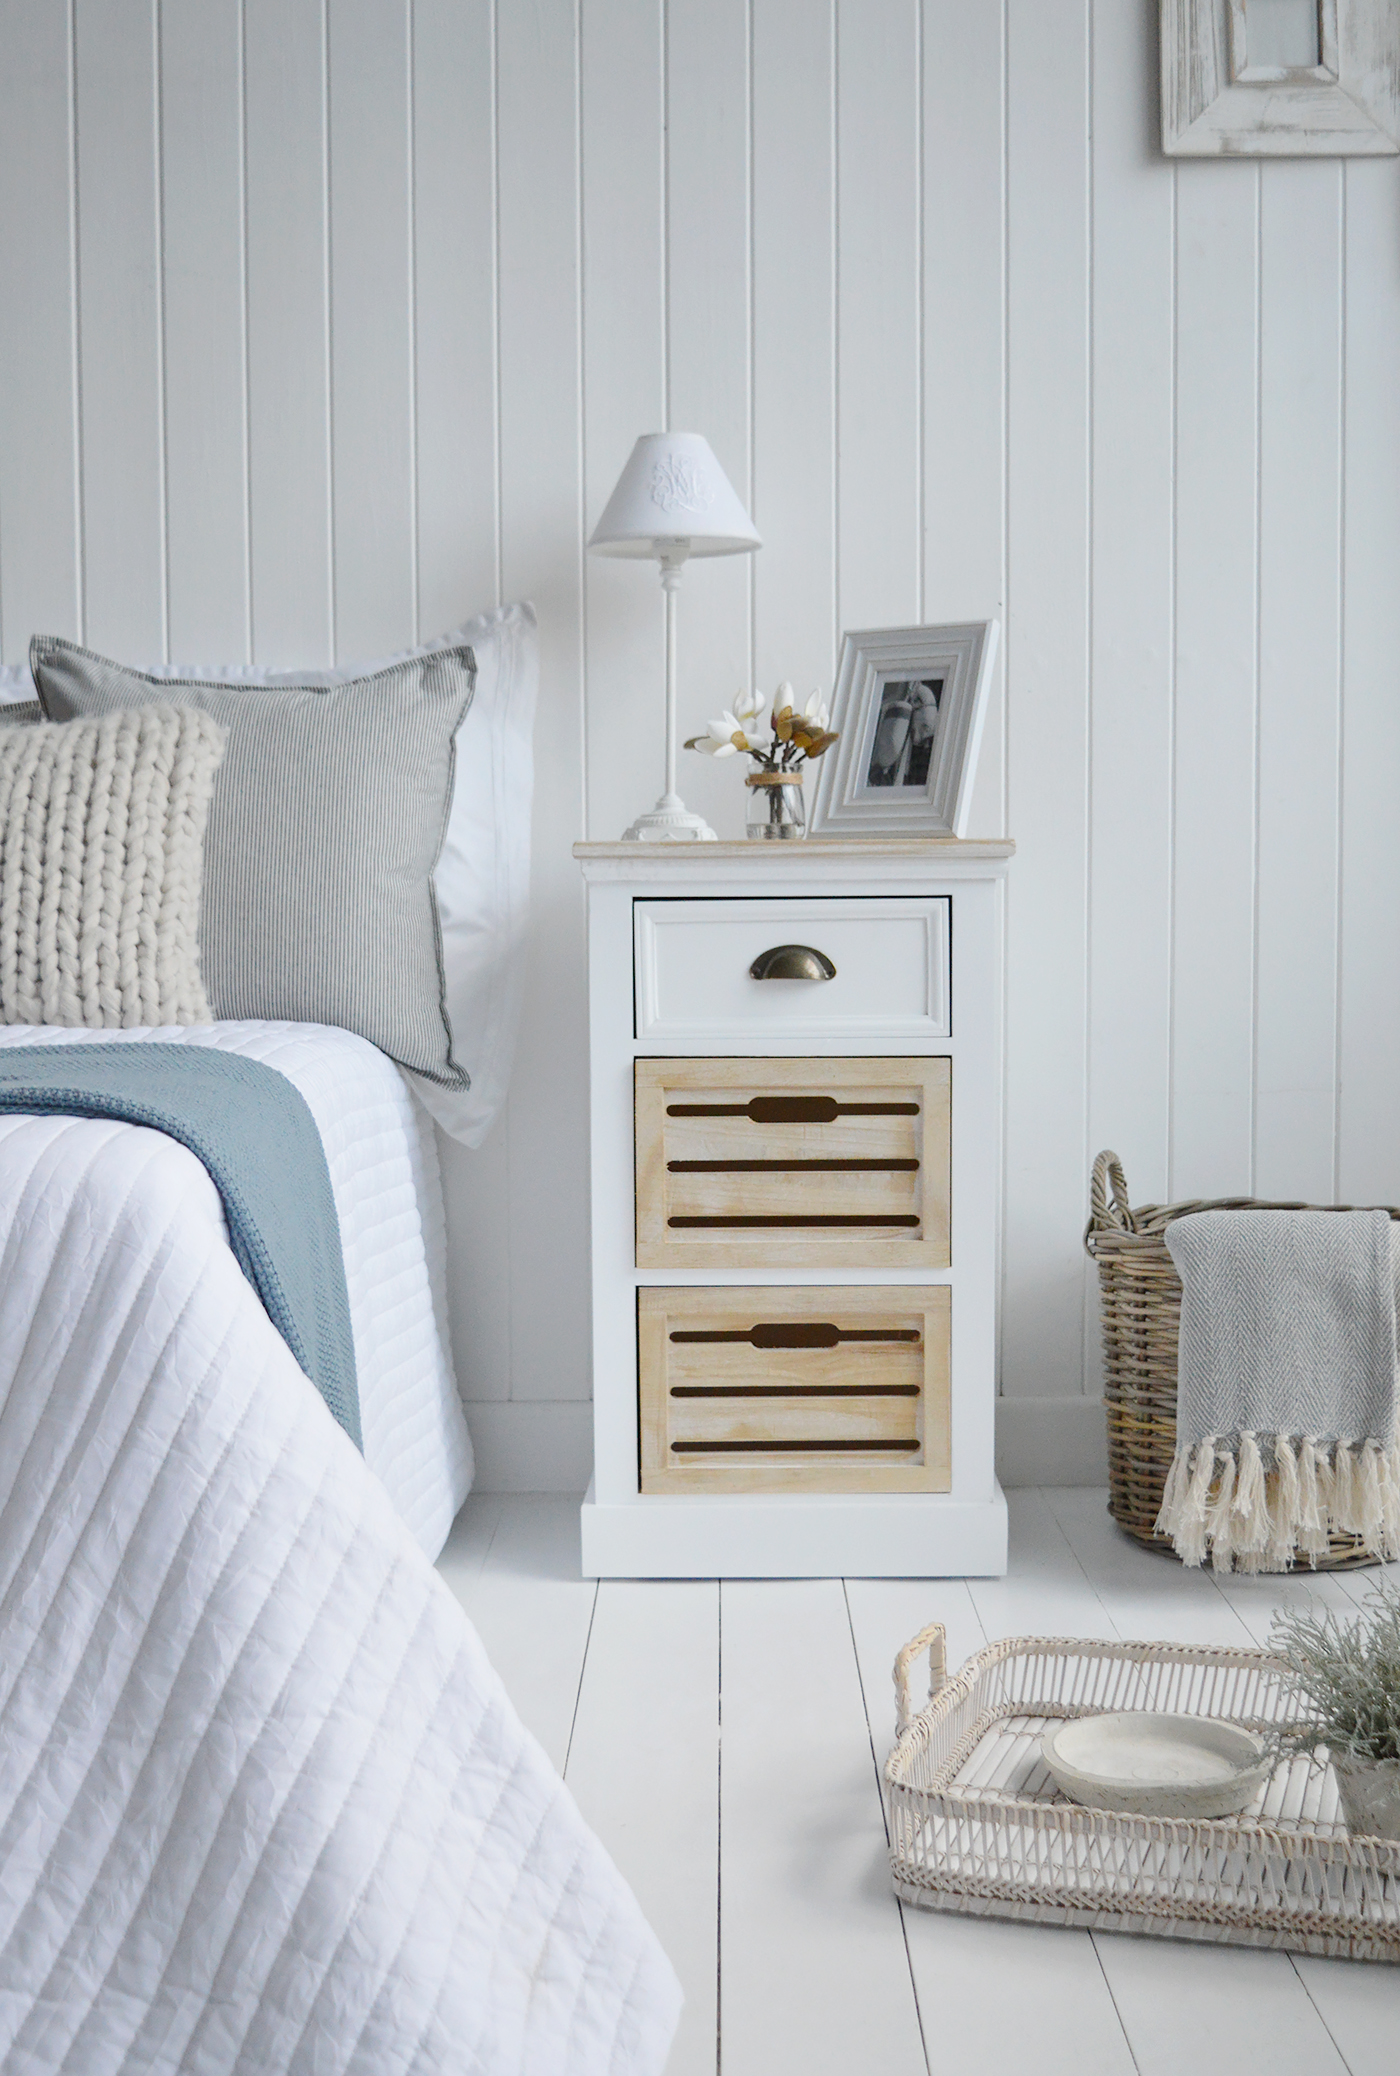 The Southport driftwood and white bedside cabinet with three drawers, suits a New England country or coastal inspired bedroom